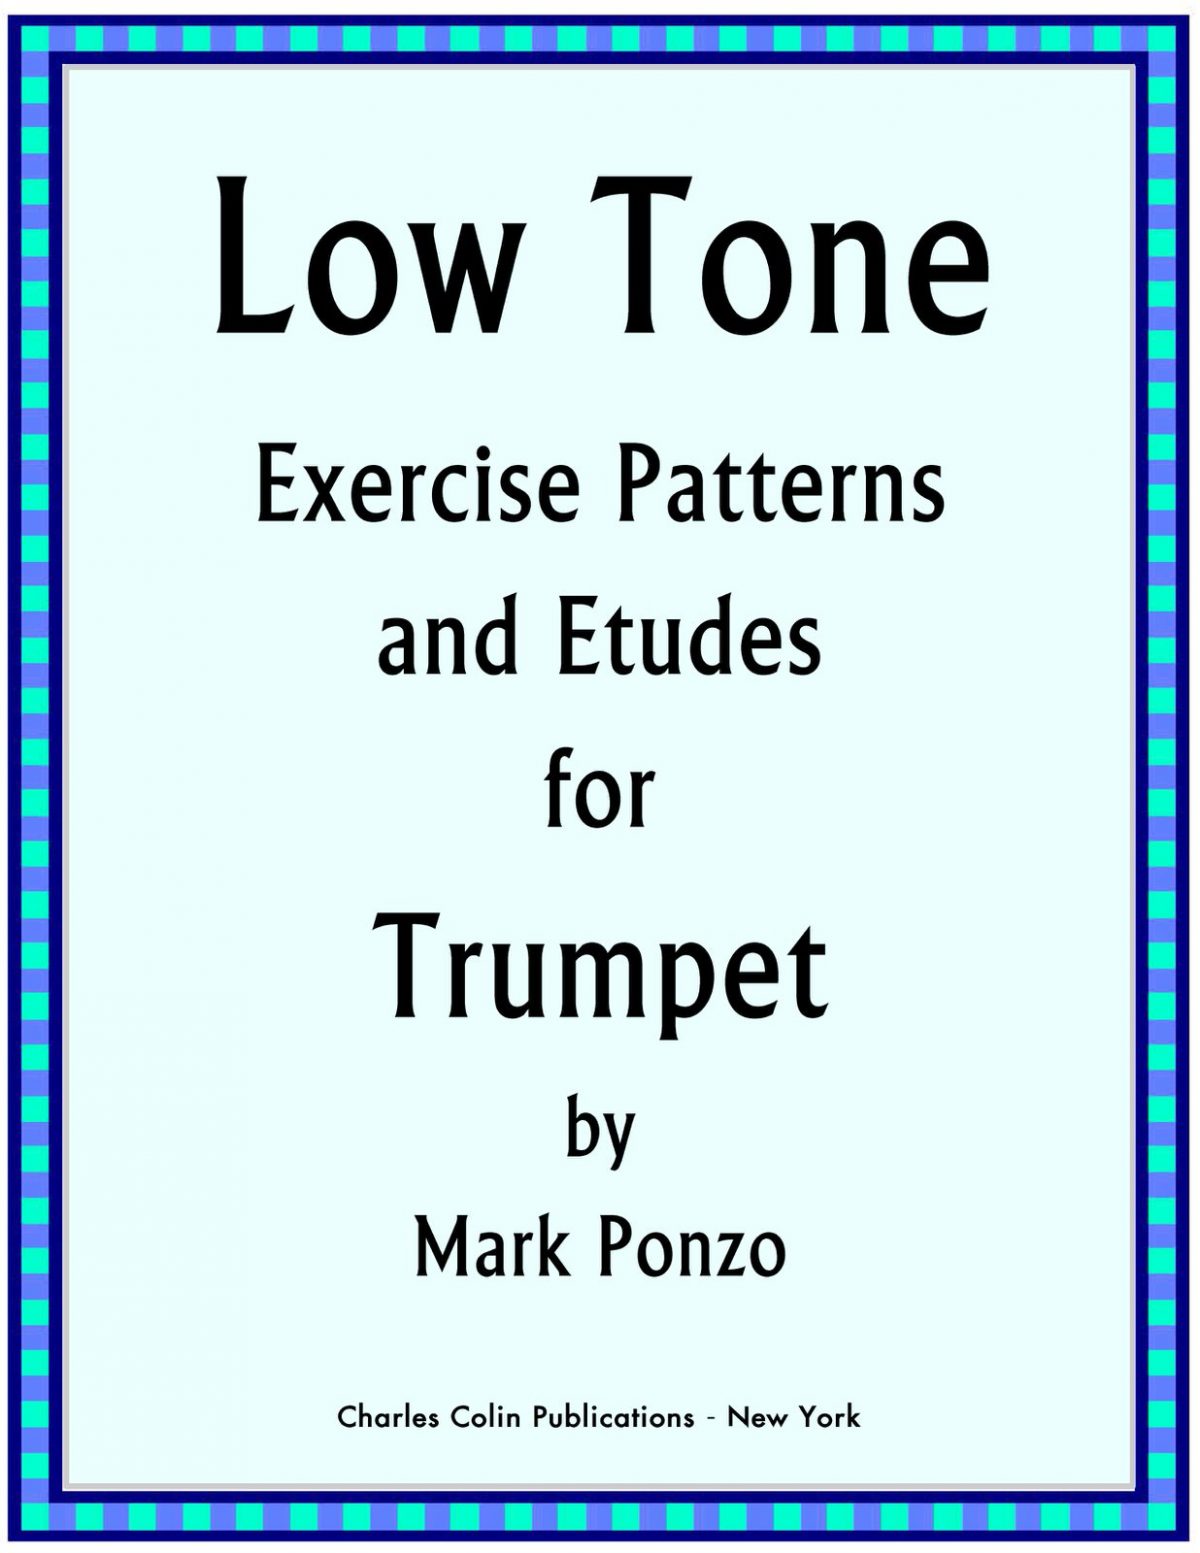 Low Tone Exercise Patterns and Etudes for Trumpet